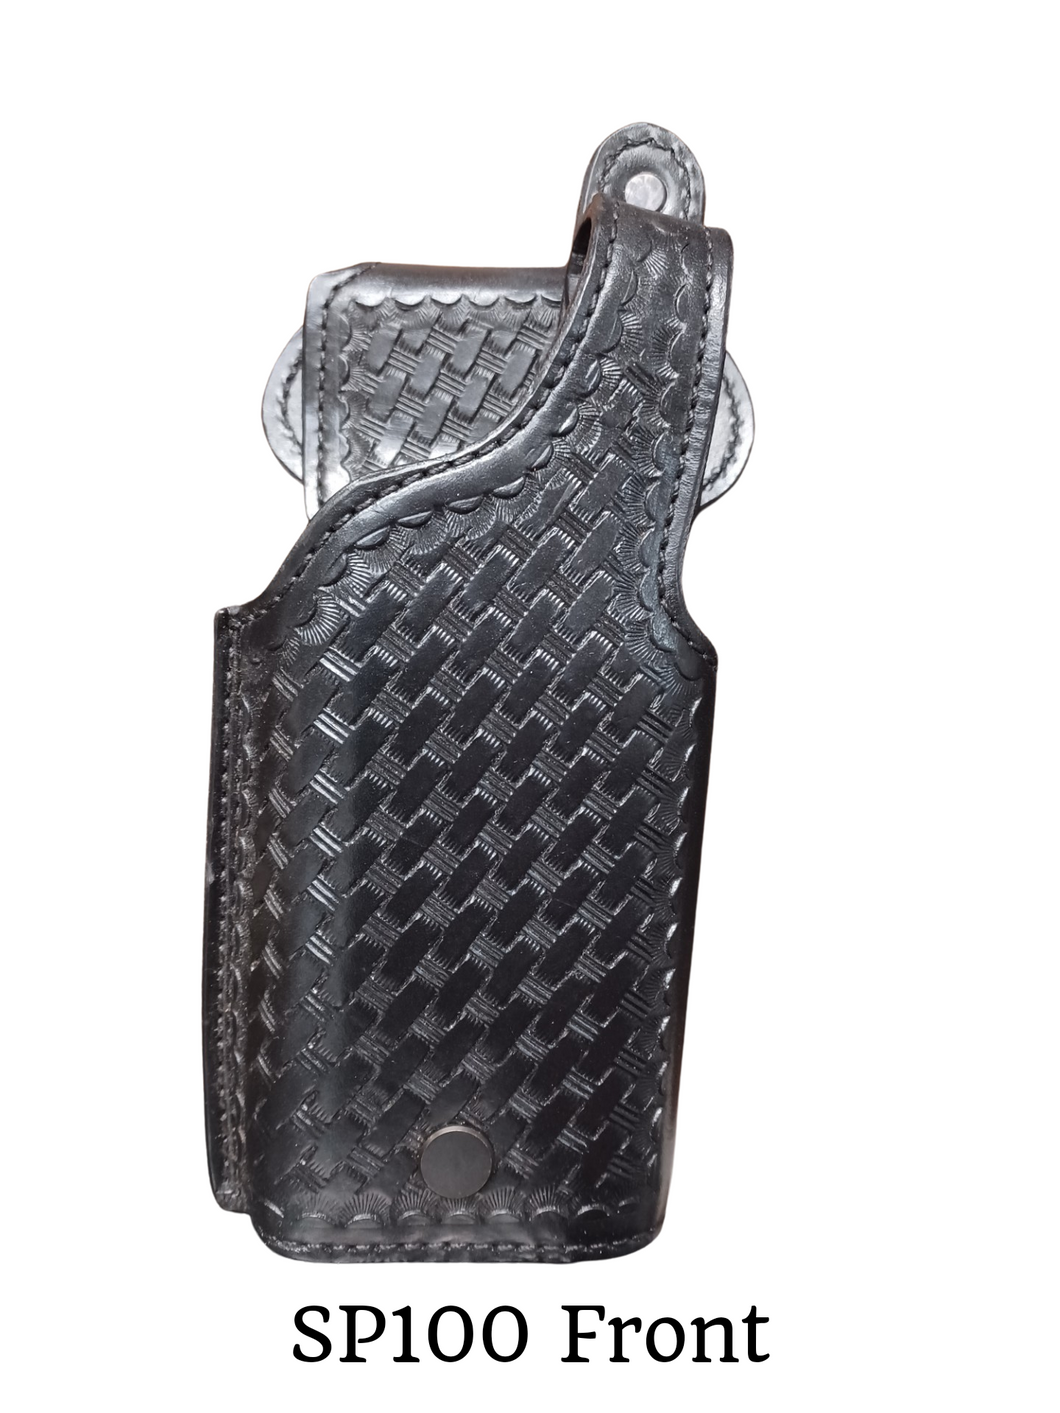 SP 100 Duty Holster for STI Tactical 4 with X300